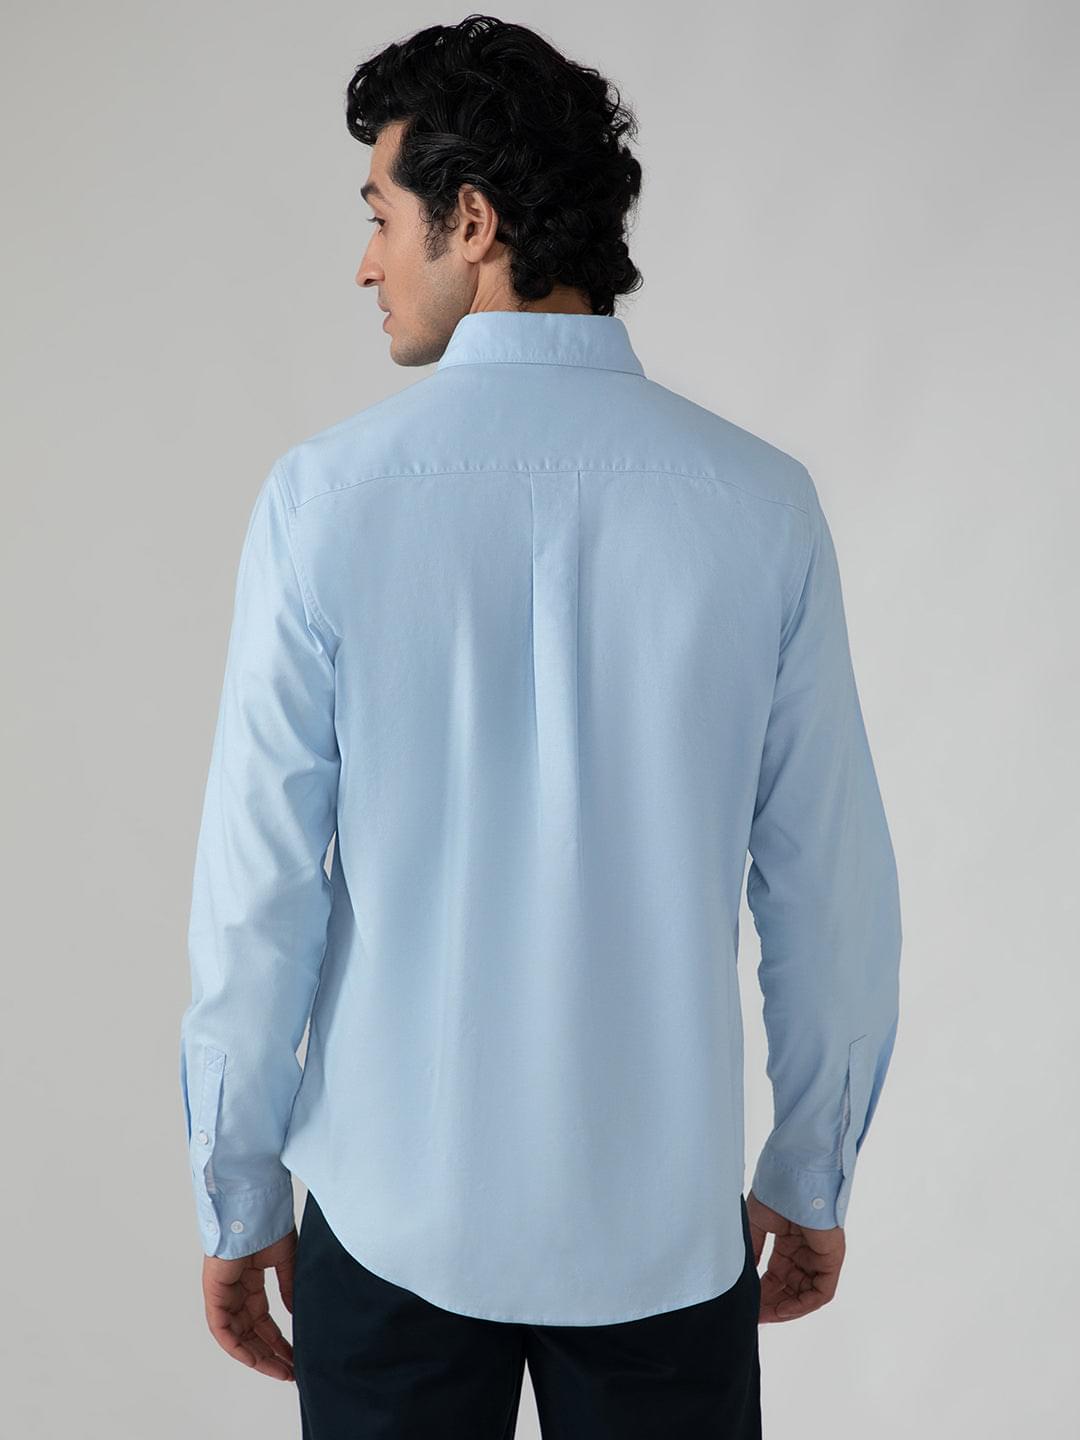 Casual Oxford Shirt in Sky Blue- Comfort Fit